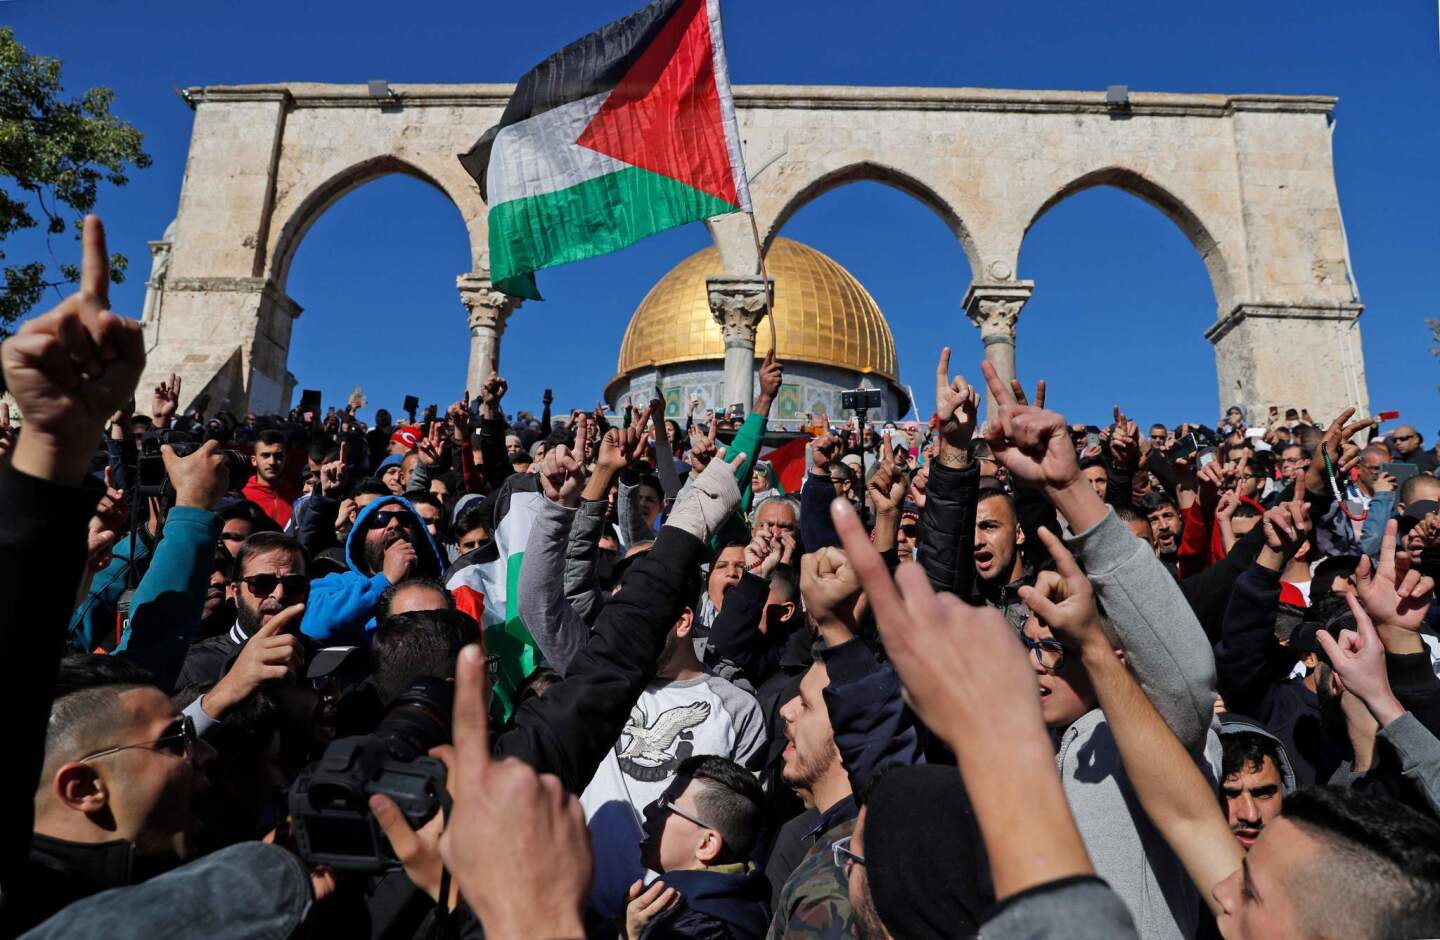 Palestinian Muslim worshipers shout slogans during Friday prayers in front of the Dome of the Rock mosque in Jerusalem's Old City. Israel deployed hundreds of additional police officers following Palestinian calls for protests after U.S. President Trump's recognition of Jerusalem as Israel's capital.